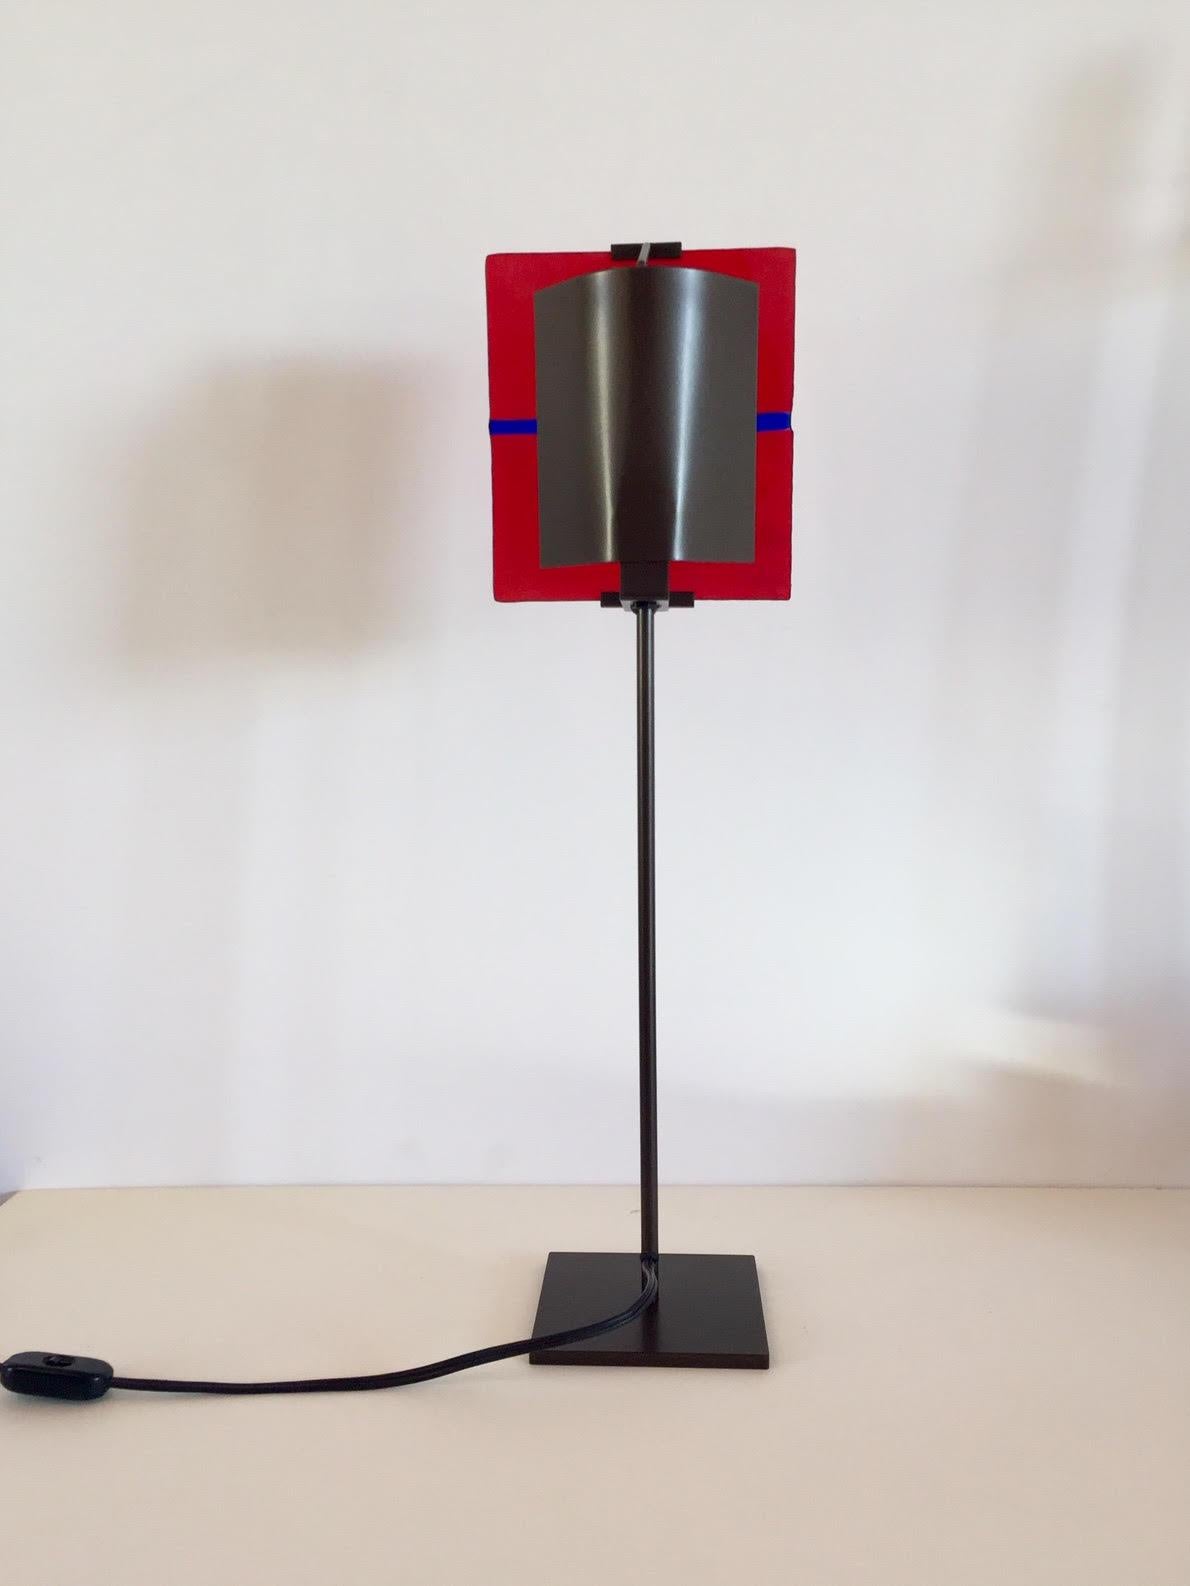 Original and unique table lamp, Postmodern in style (circa 1990s). Original piece that is minimal and modern. Bold in form and bright in color. This piece consists of an iron base that holds a handcrafted glass tile in red with a blue line across